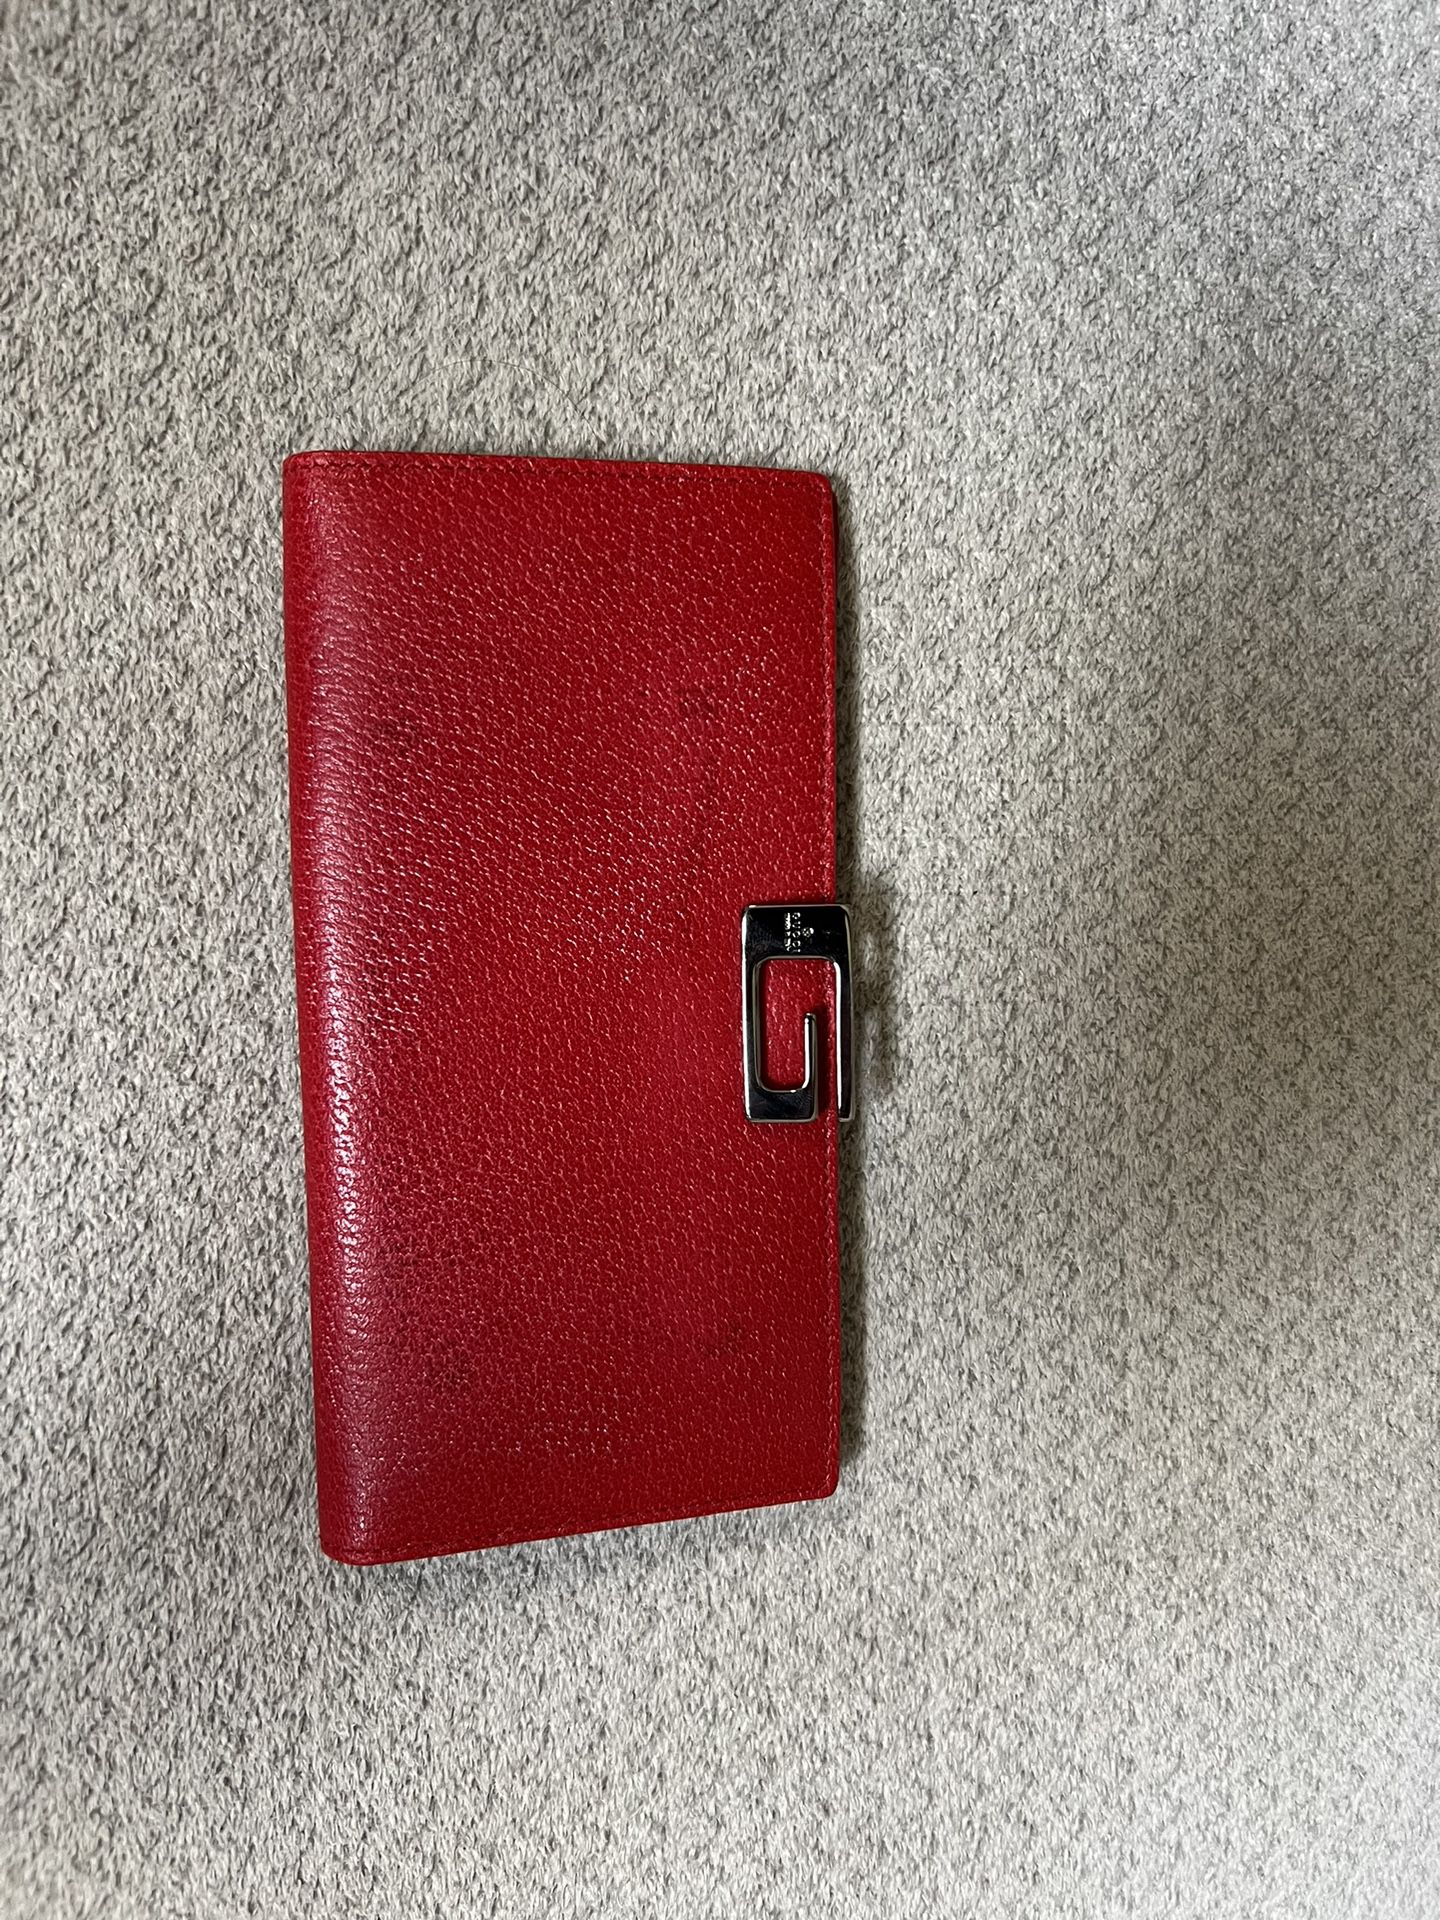 Gucci red leather wallet with square silver G clasp 